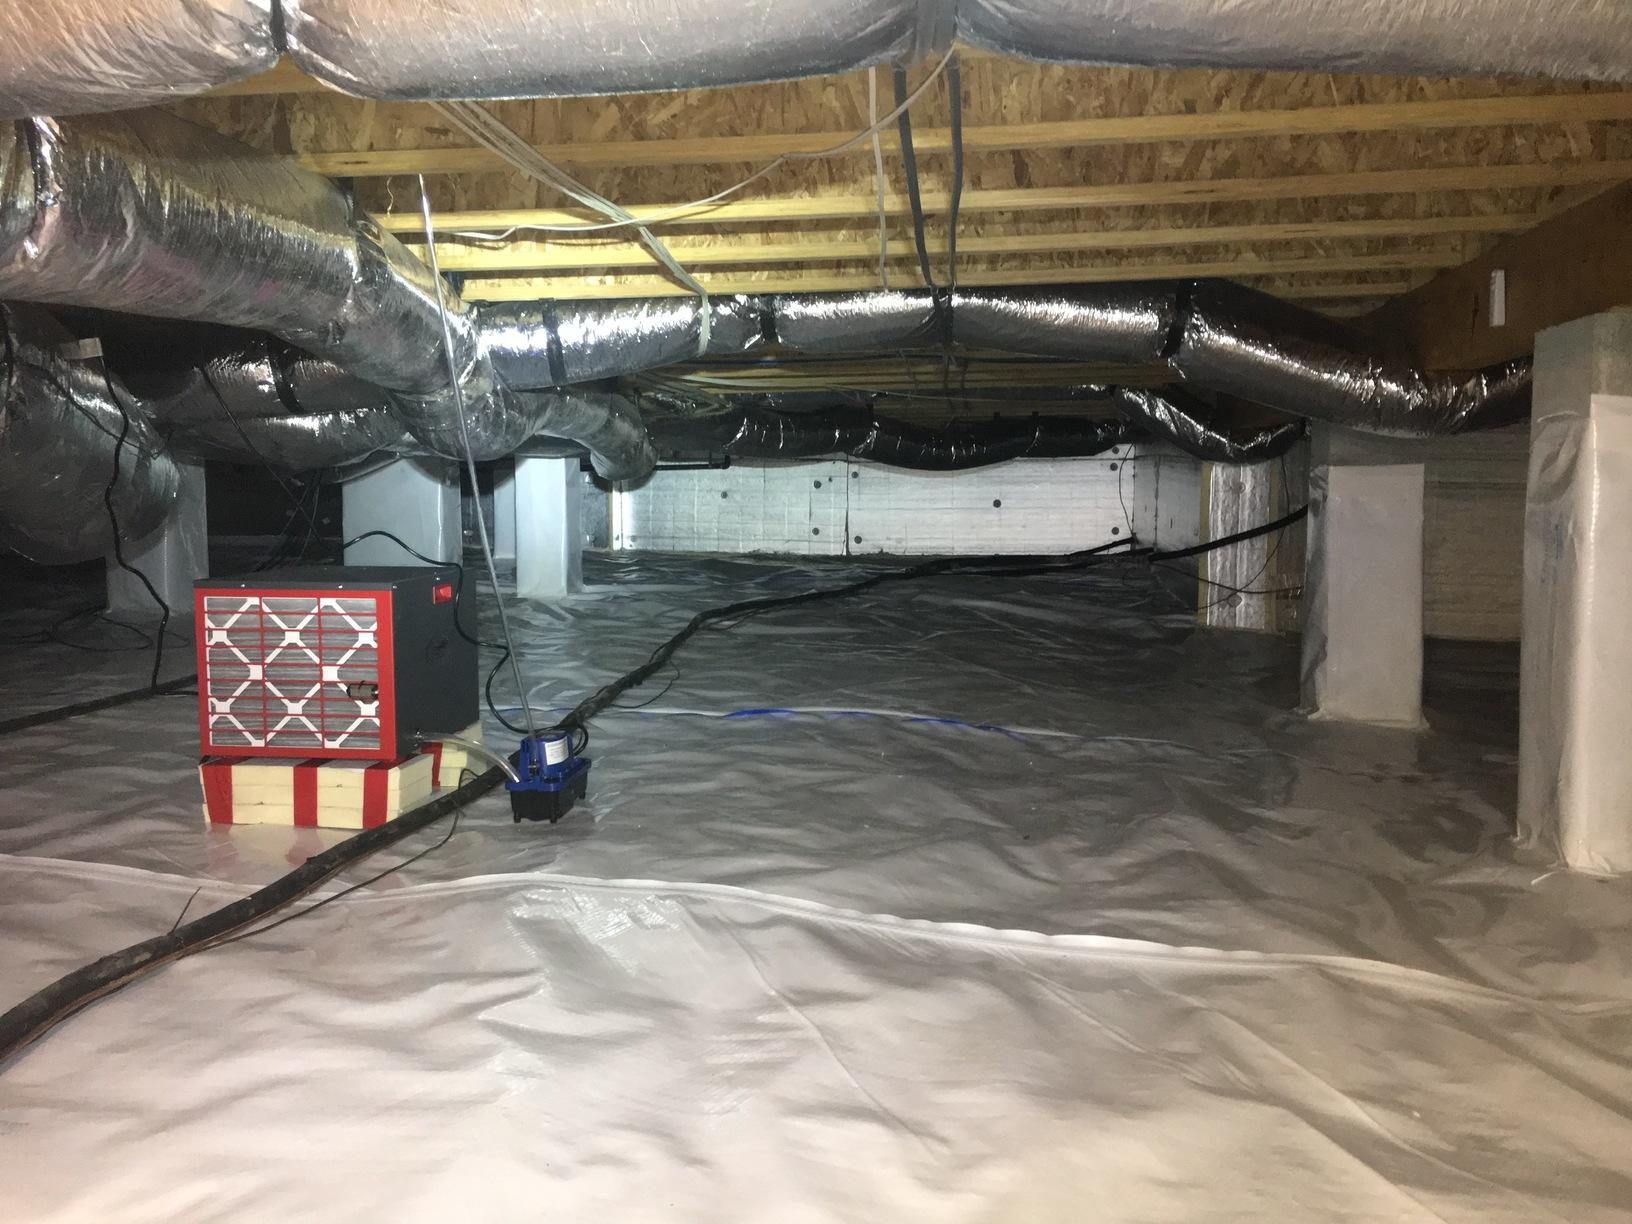 How To Reduce Humidity In A Crawl Space